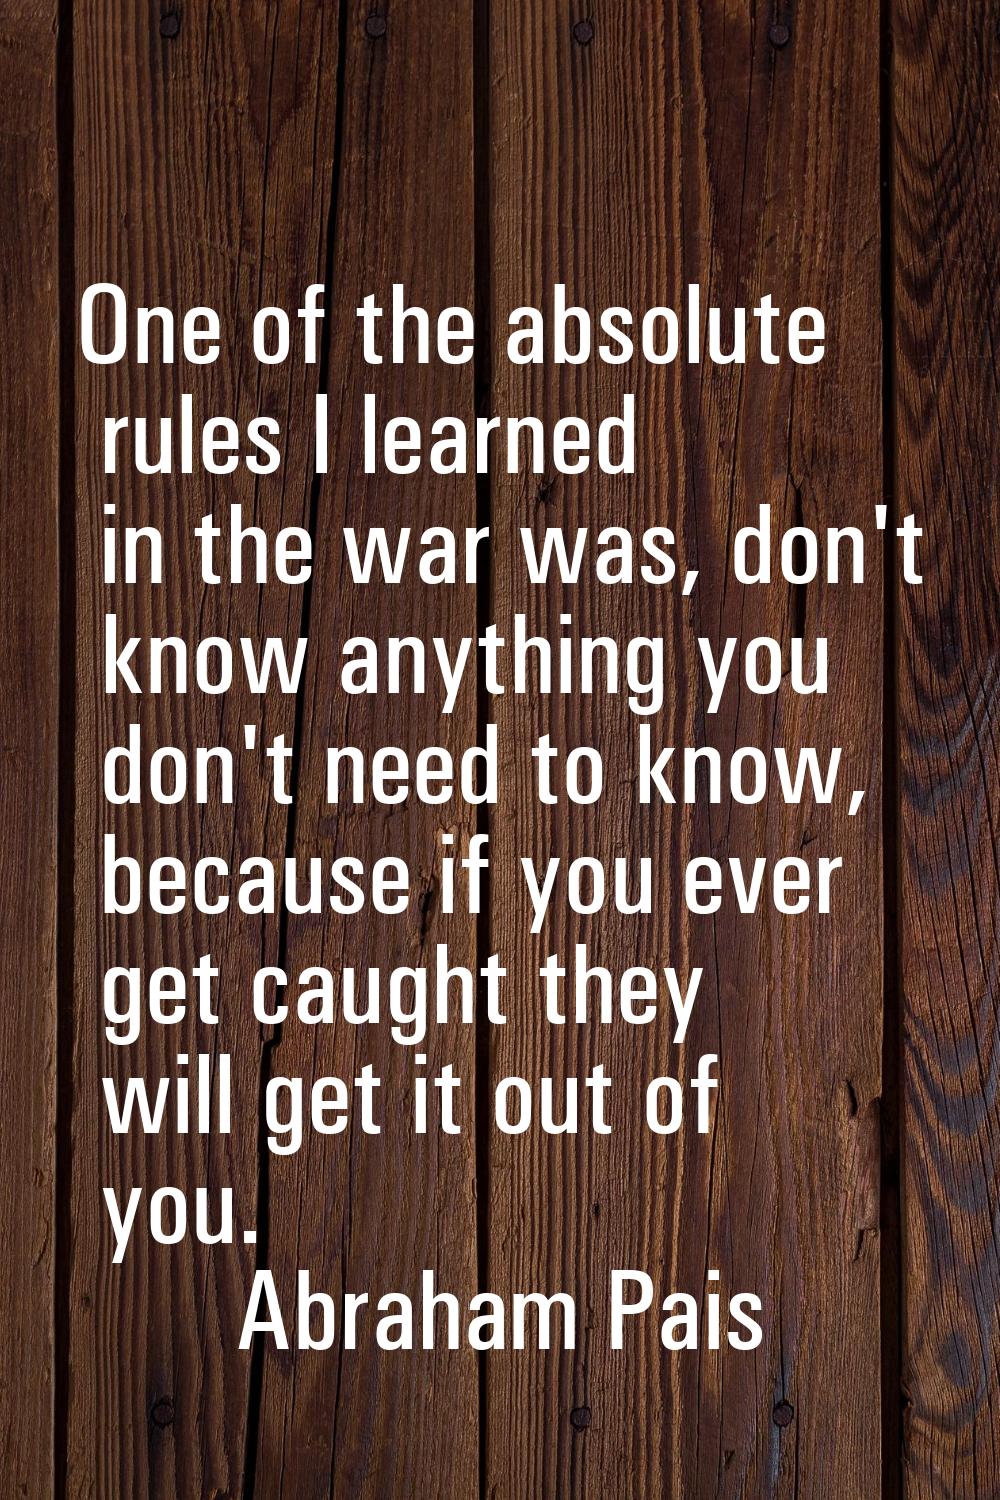 One of the absolute rules I learned in the war was, don't know anything you don't need to know, bec